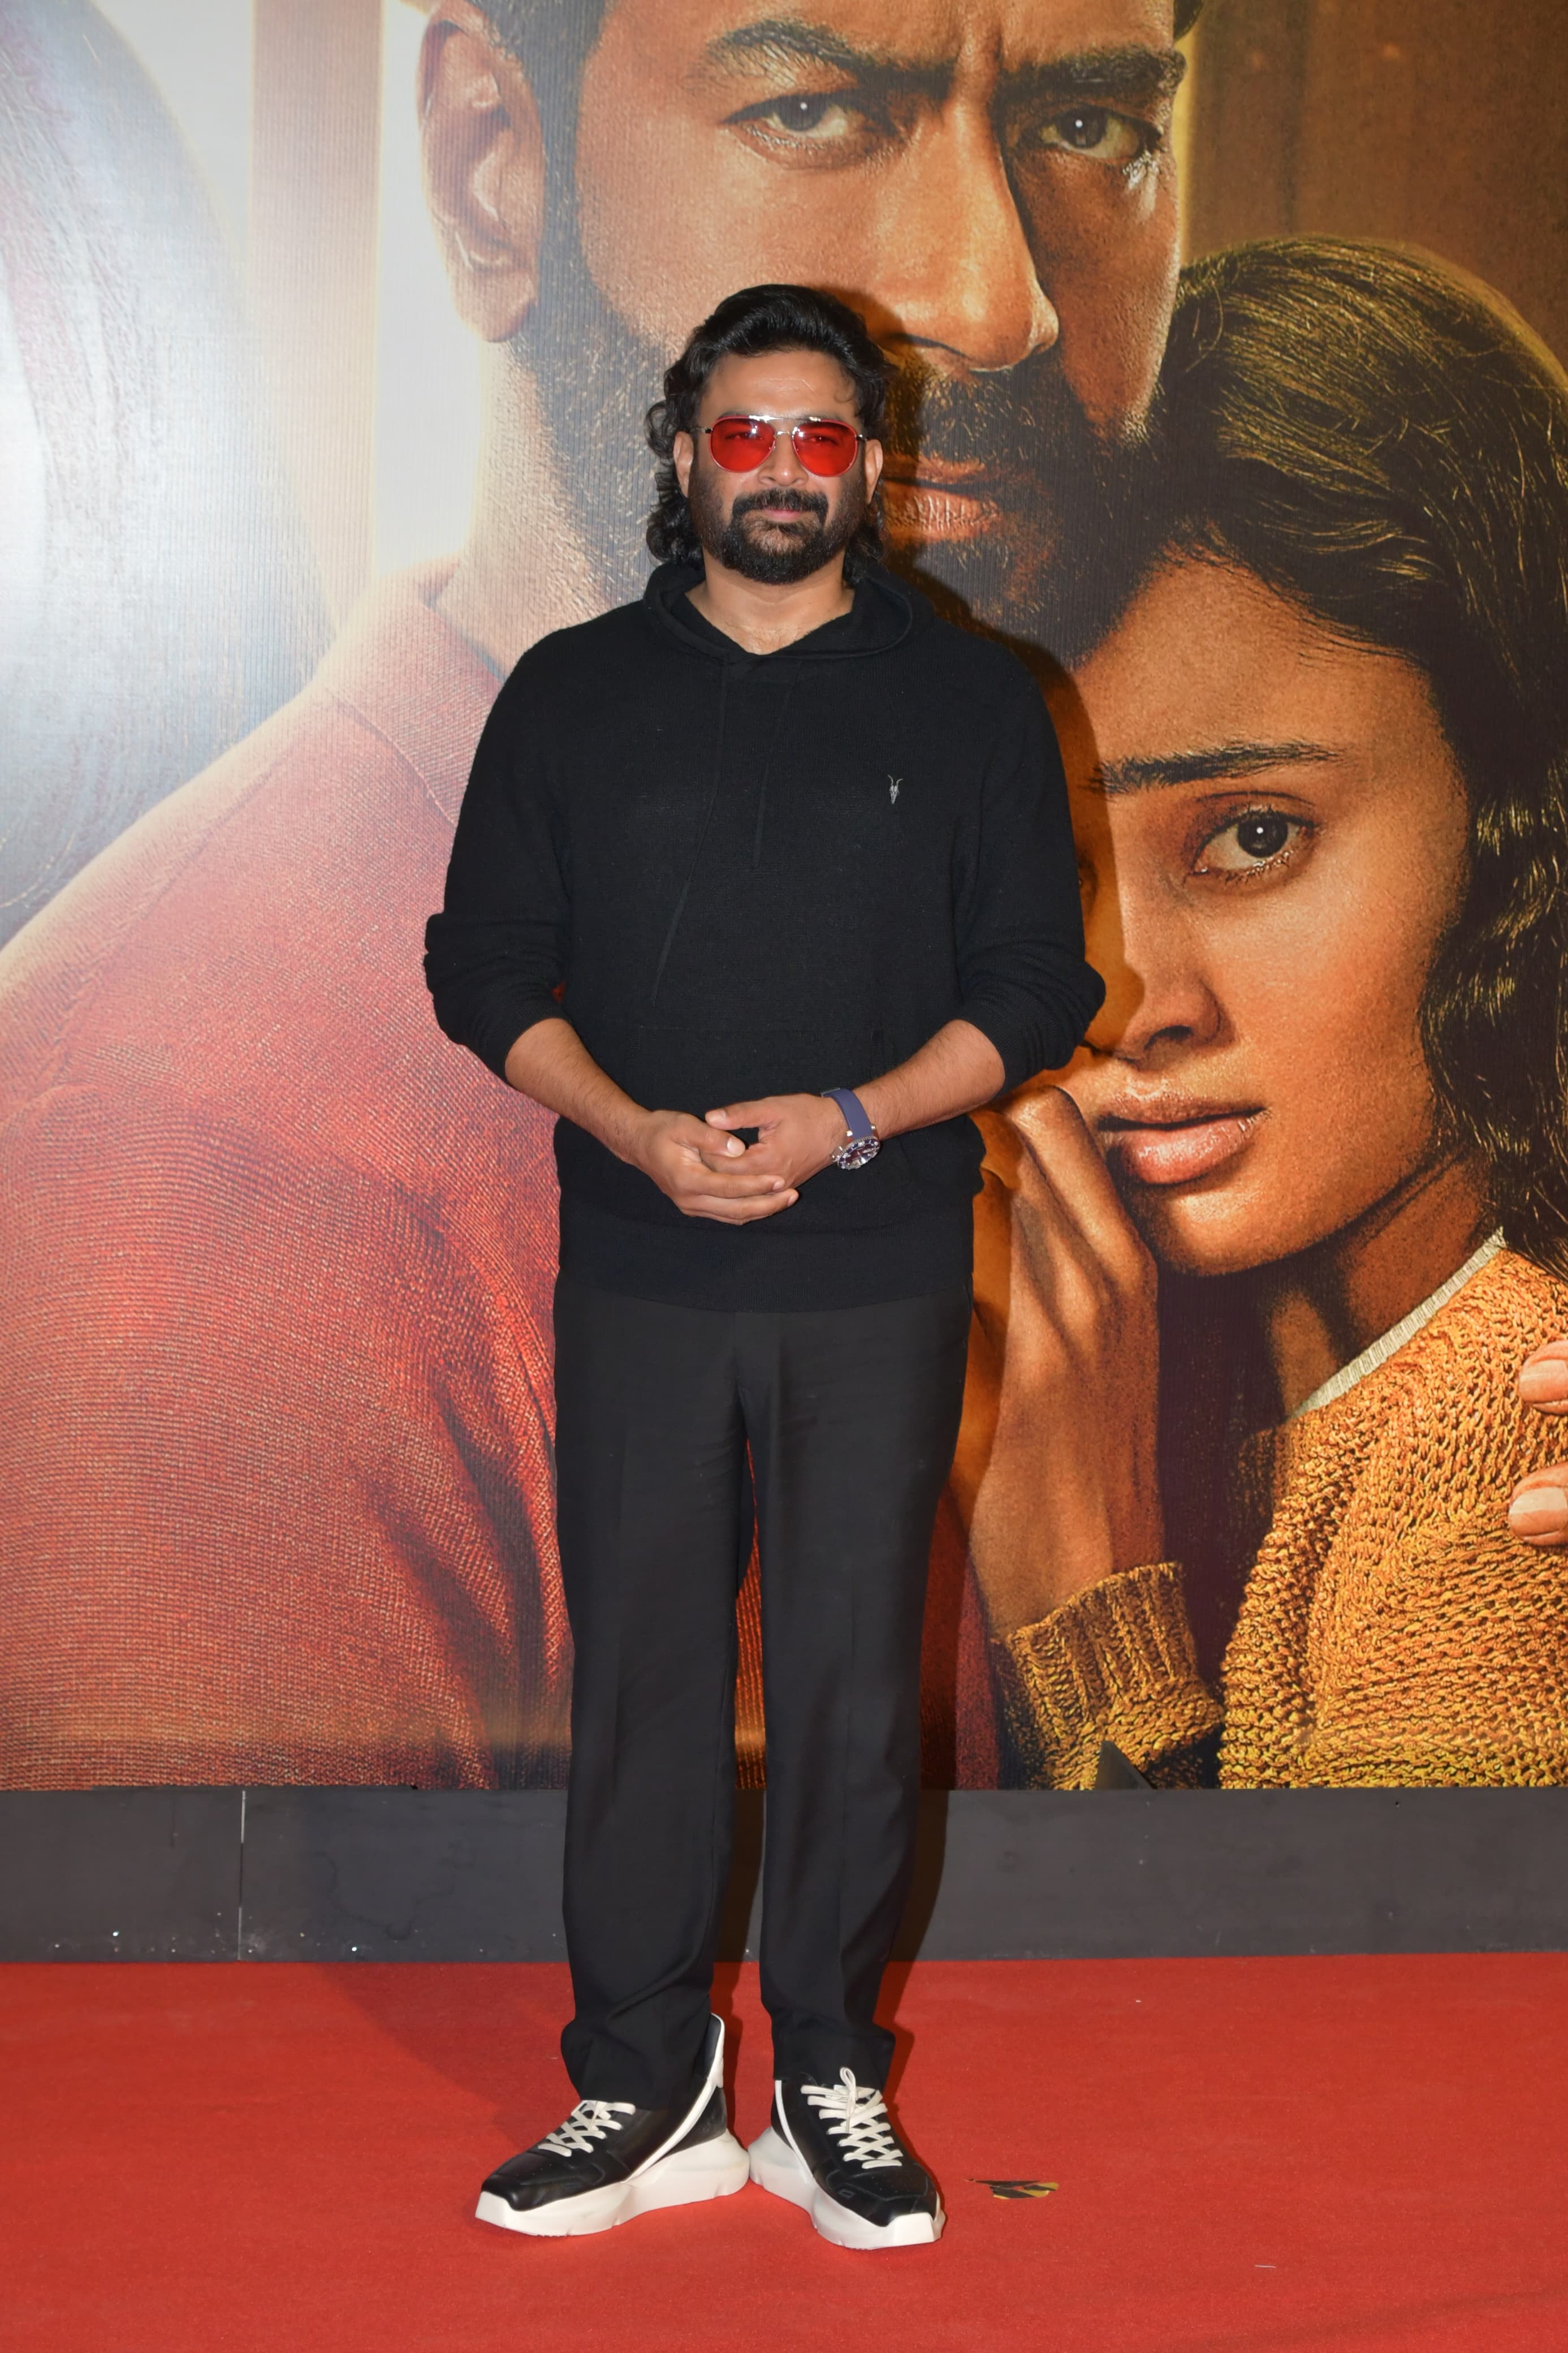 R Madhavan, who plays an antagonist in Shaitaan, attended the star-studded screening